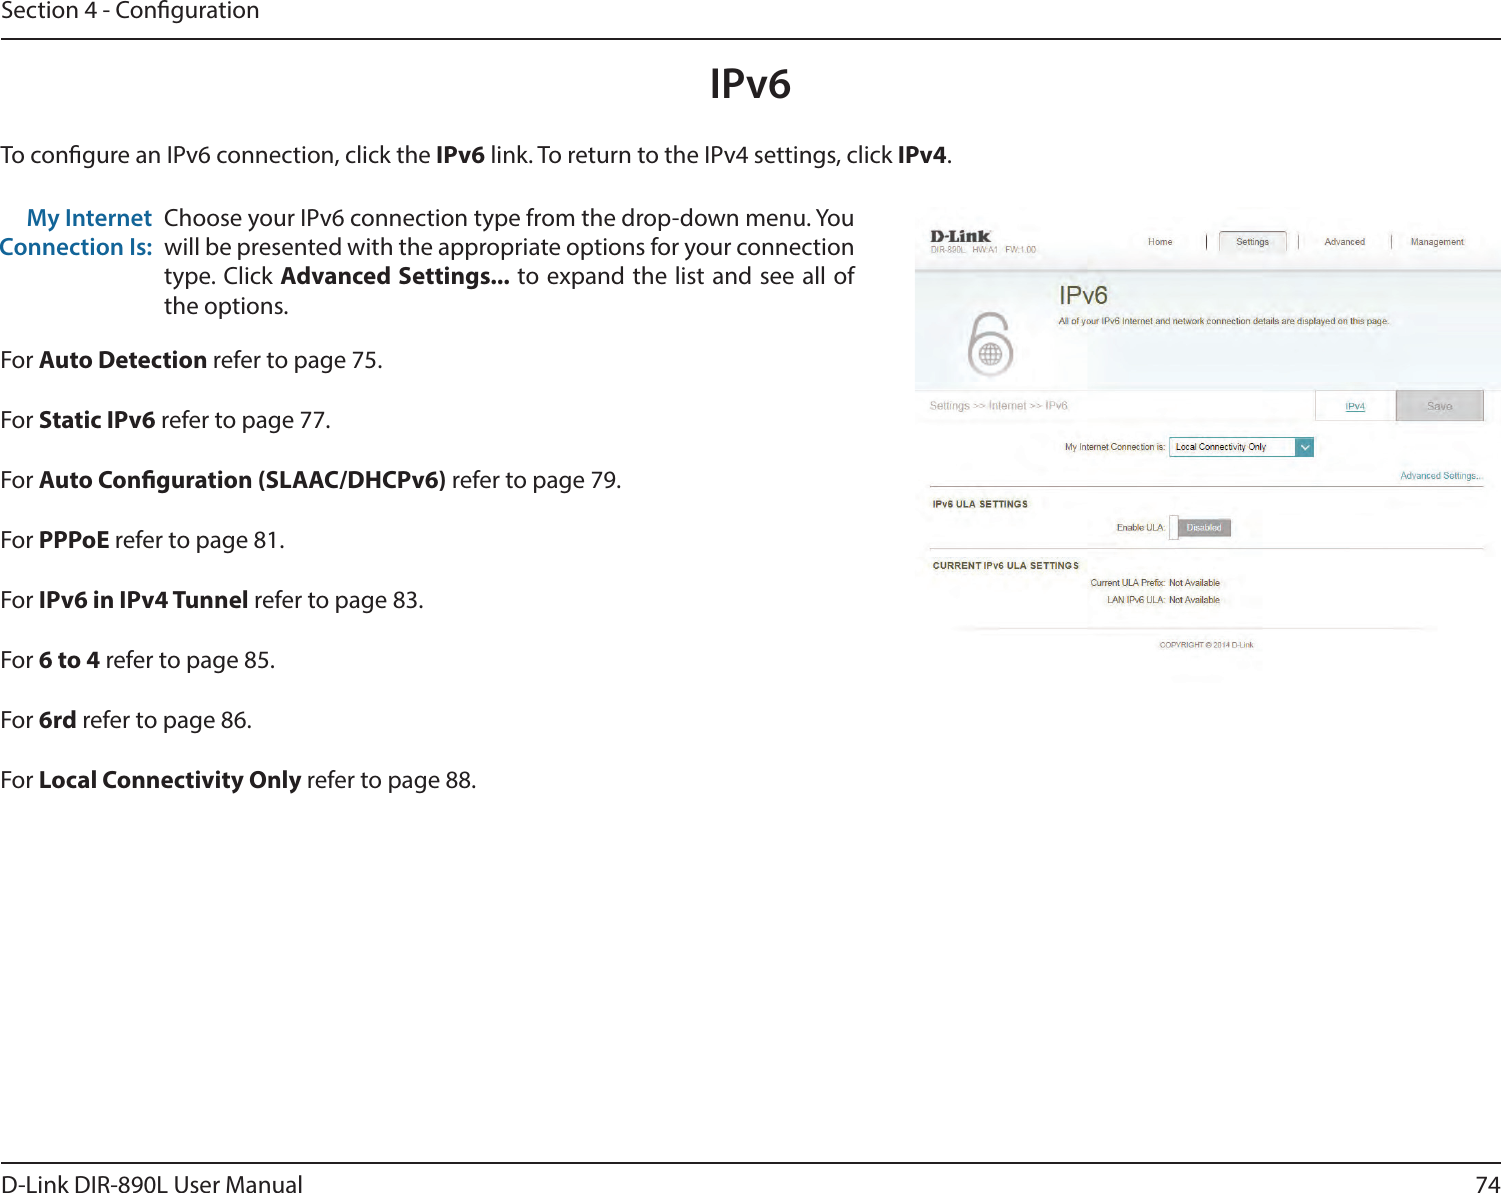 74D-Link DIR-890L User ManualSection 4 - CongurationIPv6To congure an IPv6 connection, click the IPv6 link. To return to the IPv4 settings, click IPv4.Choose your IPv6 connection type from the drop-down menu. You will be presented with the appropriate options for your connection type. Click Advanced Settings... to expand the list and see all of the options.My Internet Connection Is:For Auto Detection refer to page 75.For Static IPv6 refer to page 77.For Auto Conguration (SLAAC/DHCPv6) refer to page 79.For PPPoE refer to page 81.For IPv6 in IPv4 Tunnel refer to page 83.For 6 to 4 refer to page 85.For 6rd refer to page 86.For Local Connectivity Only refer to page 88.